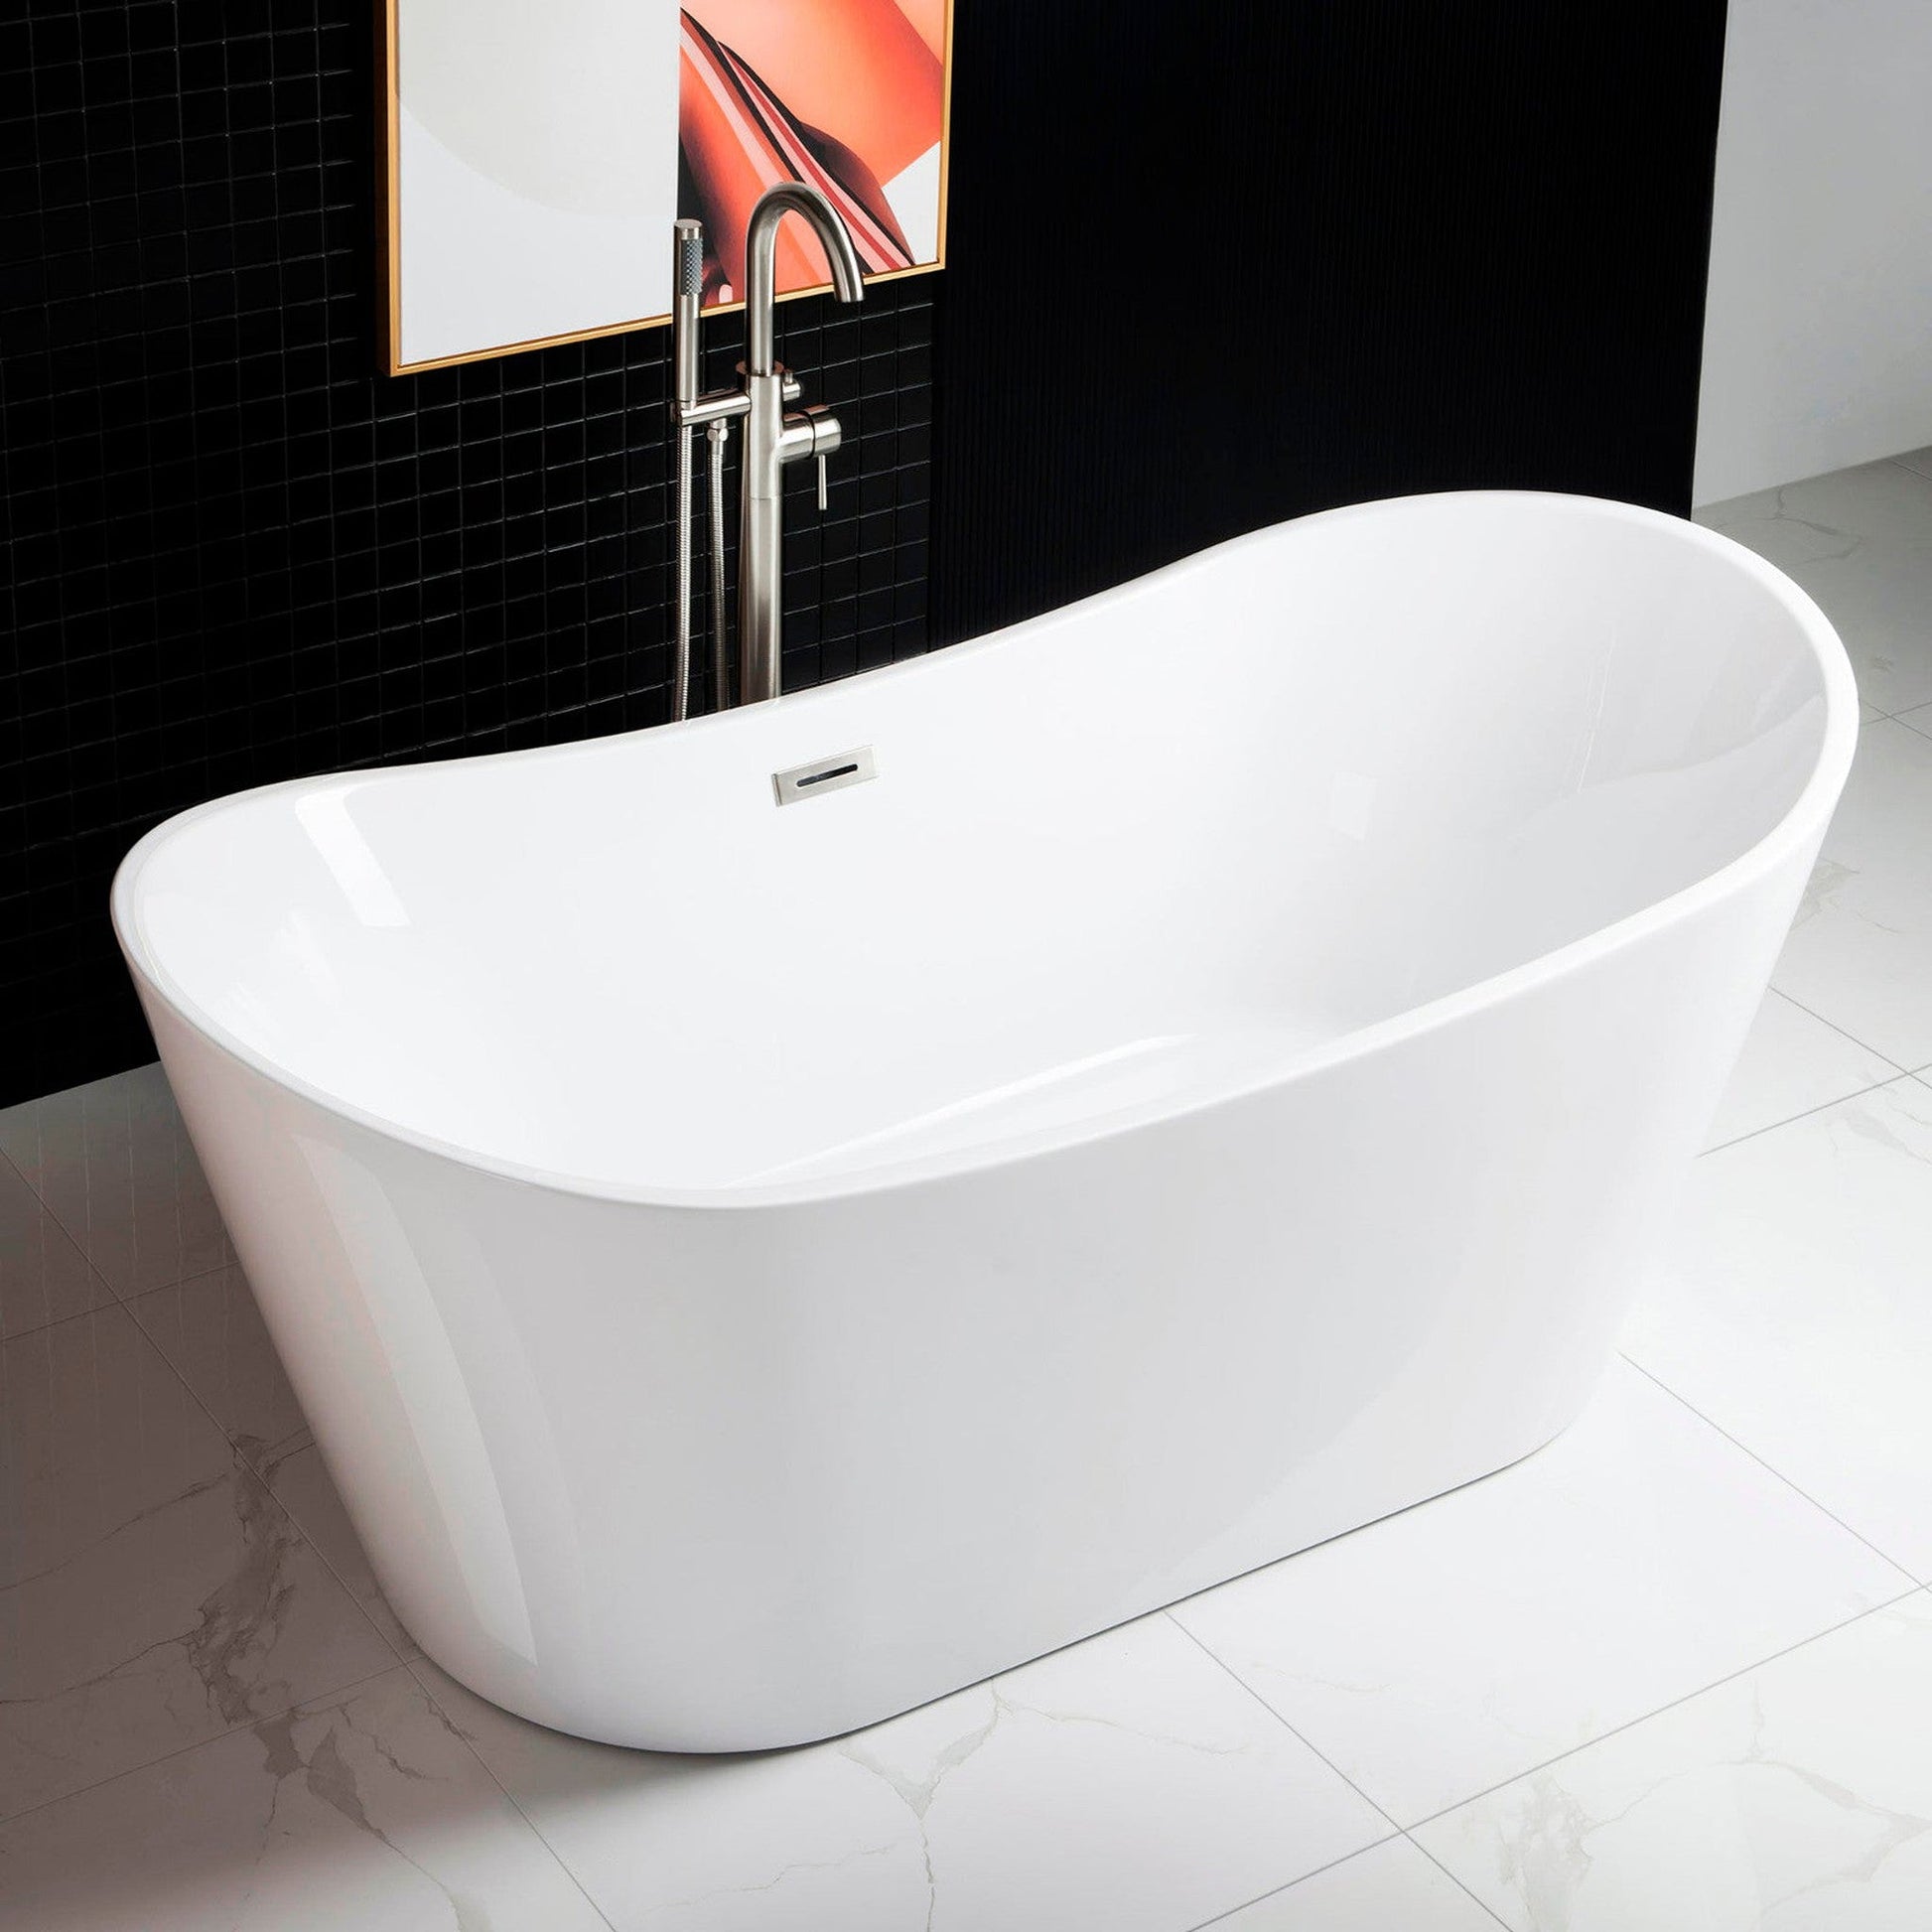 WoodBridge B0010 67" White Acrylic Freestanding Contemporary Soaking Bathtub With Chrome Drain, Overflow, F-0017CH Tub Filler and Caddy Tray